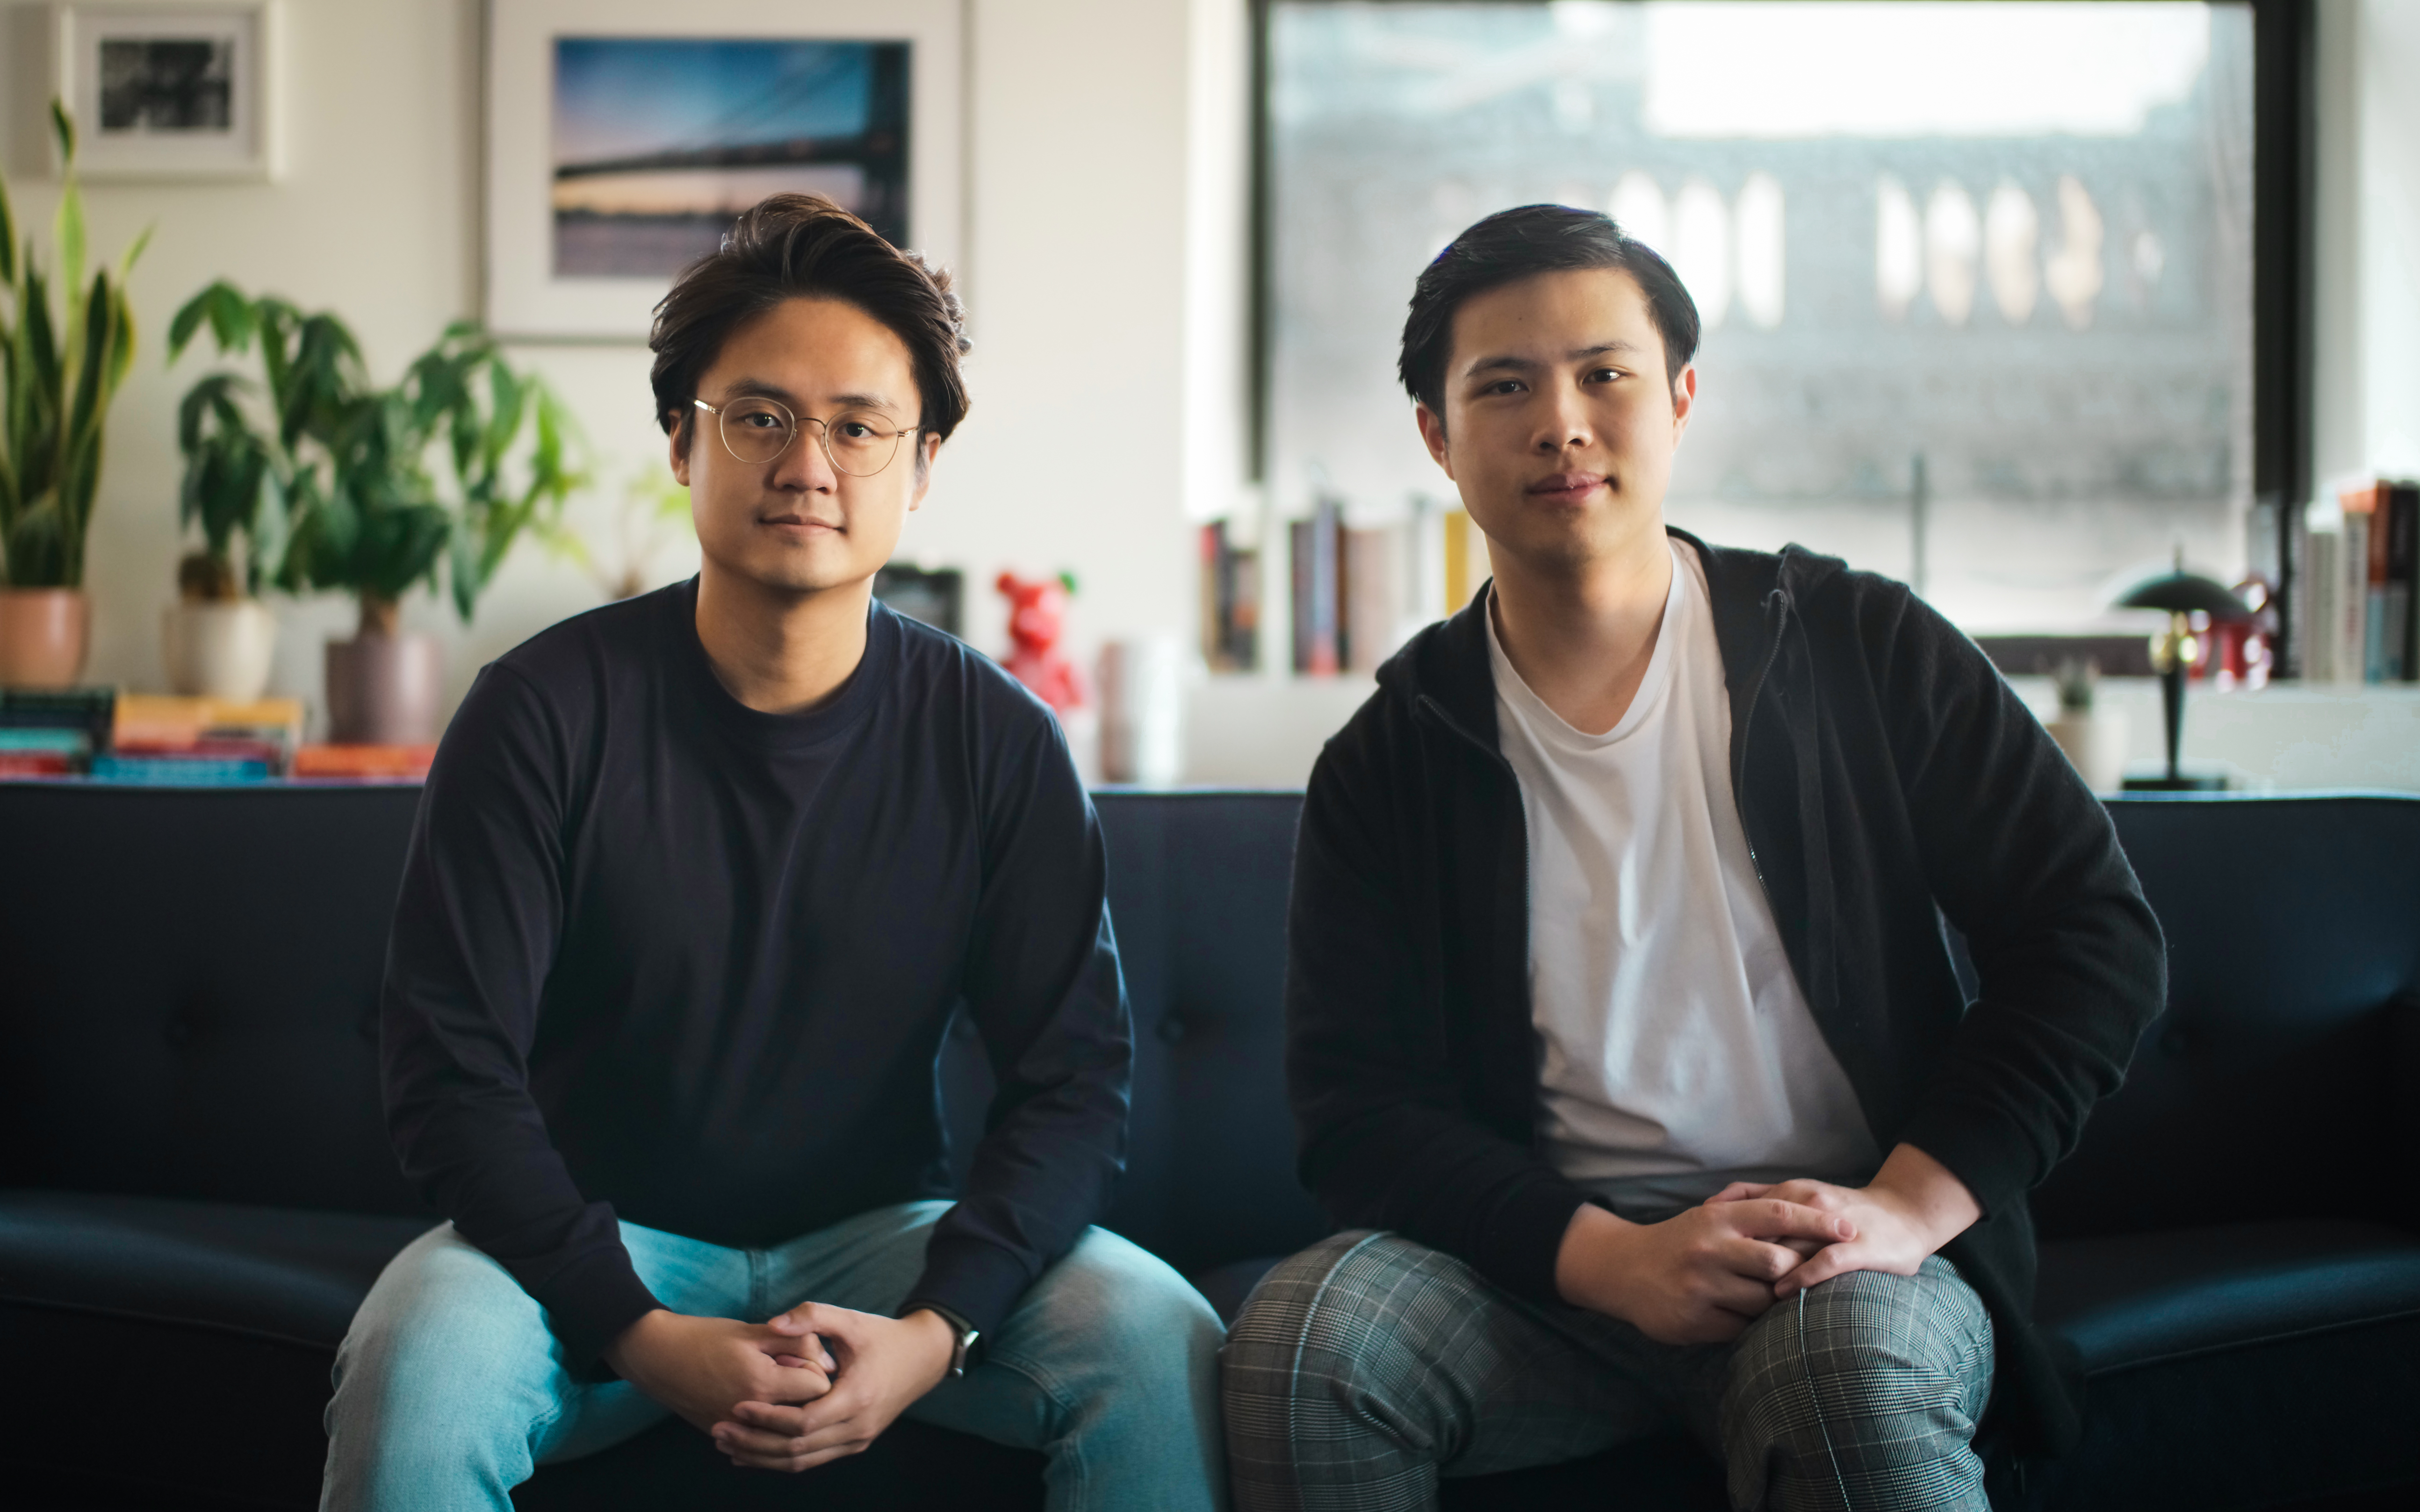 Starlight co-founders Grey Nguyen and Ben Yang